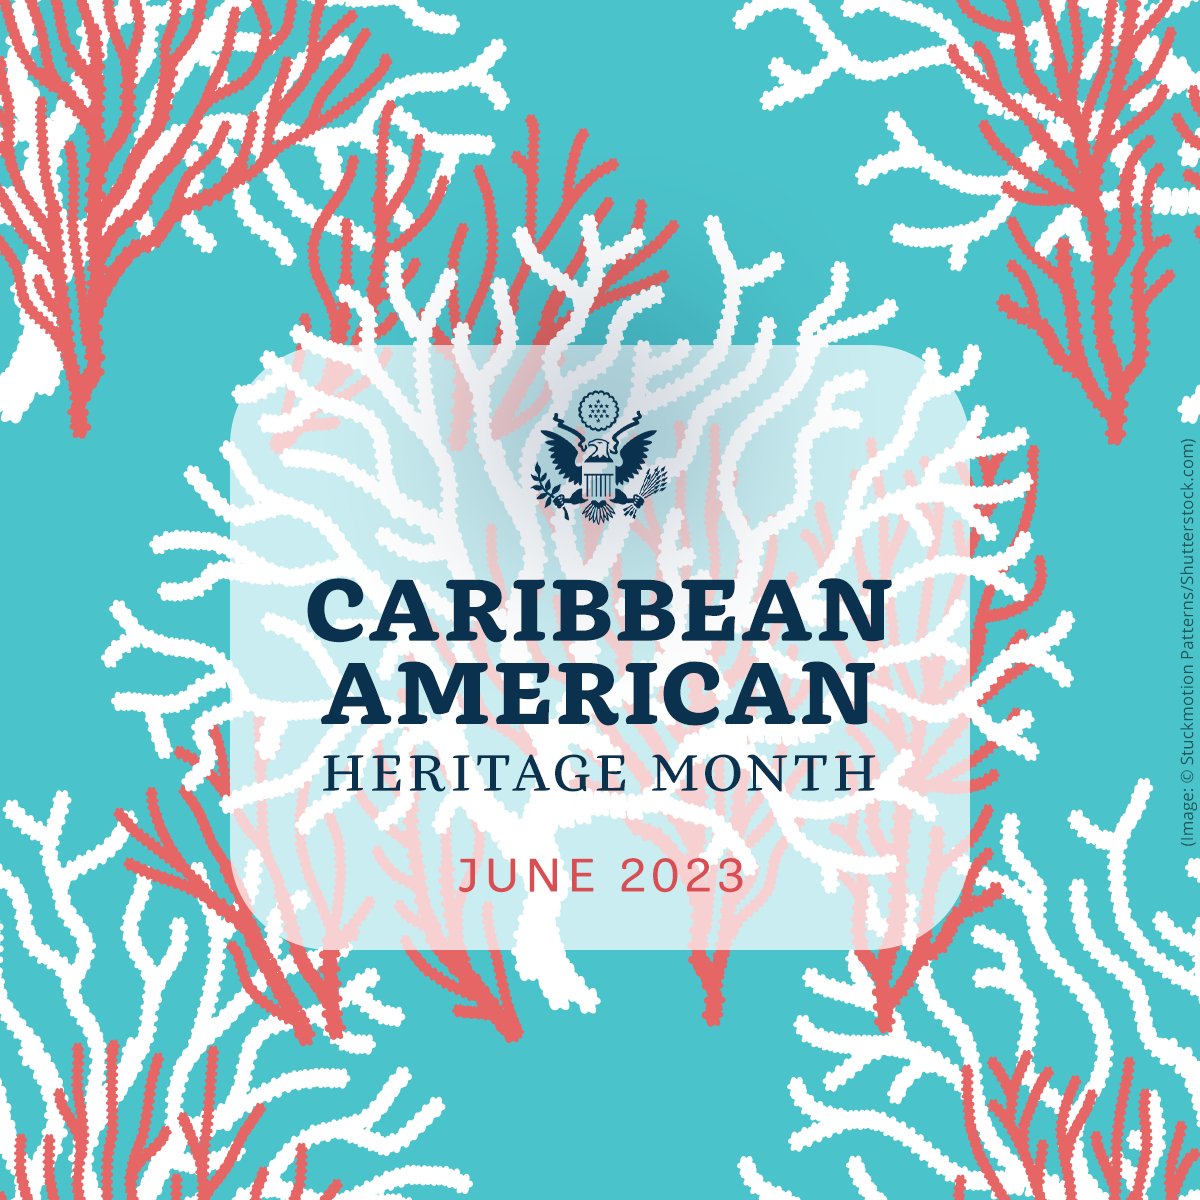 June is National Caribbean-American Heritage Month, a time to honor the many Caribbean-Americans who have contributed to the progress, diversity, and prosperity of the United States.